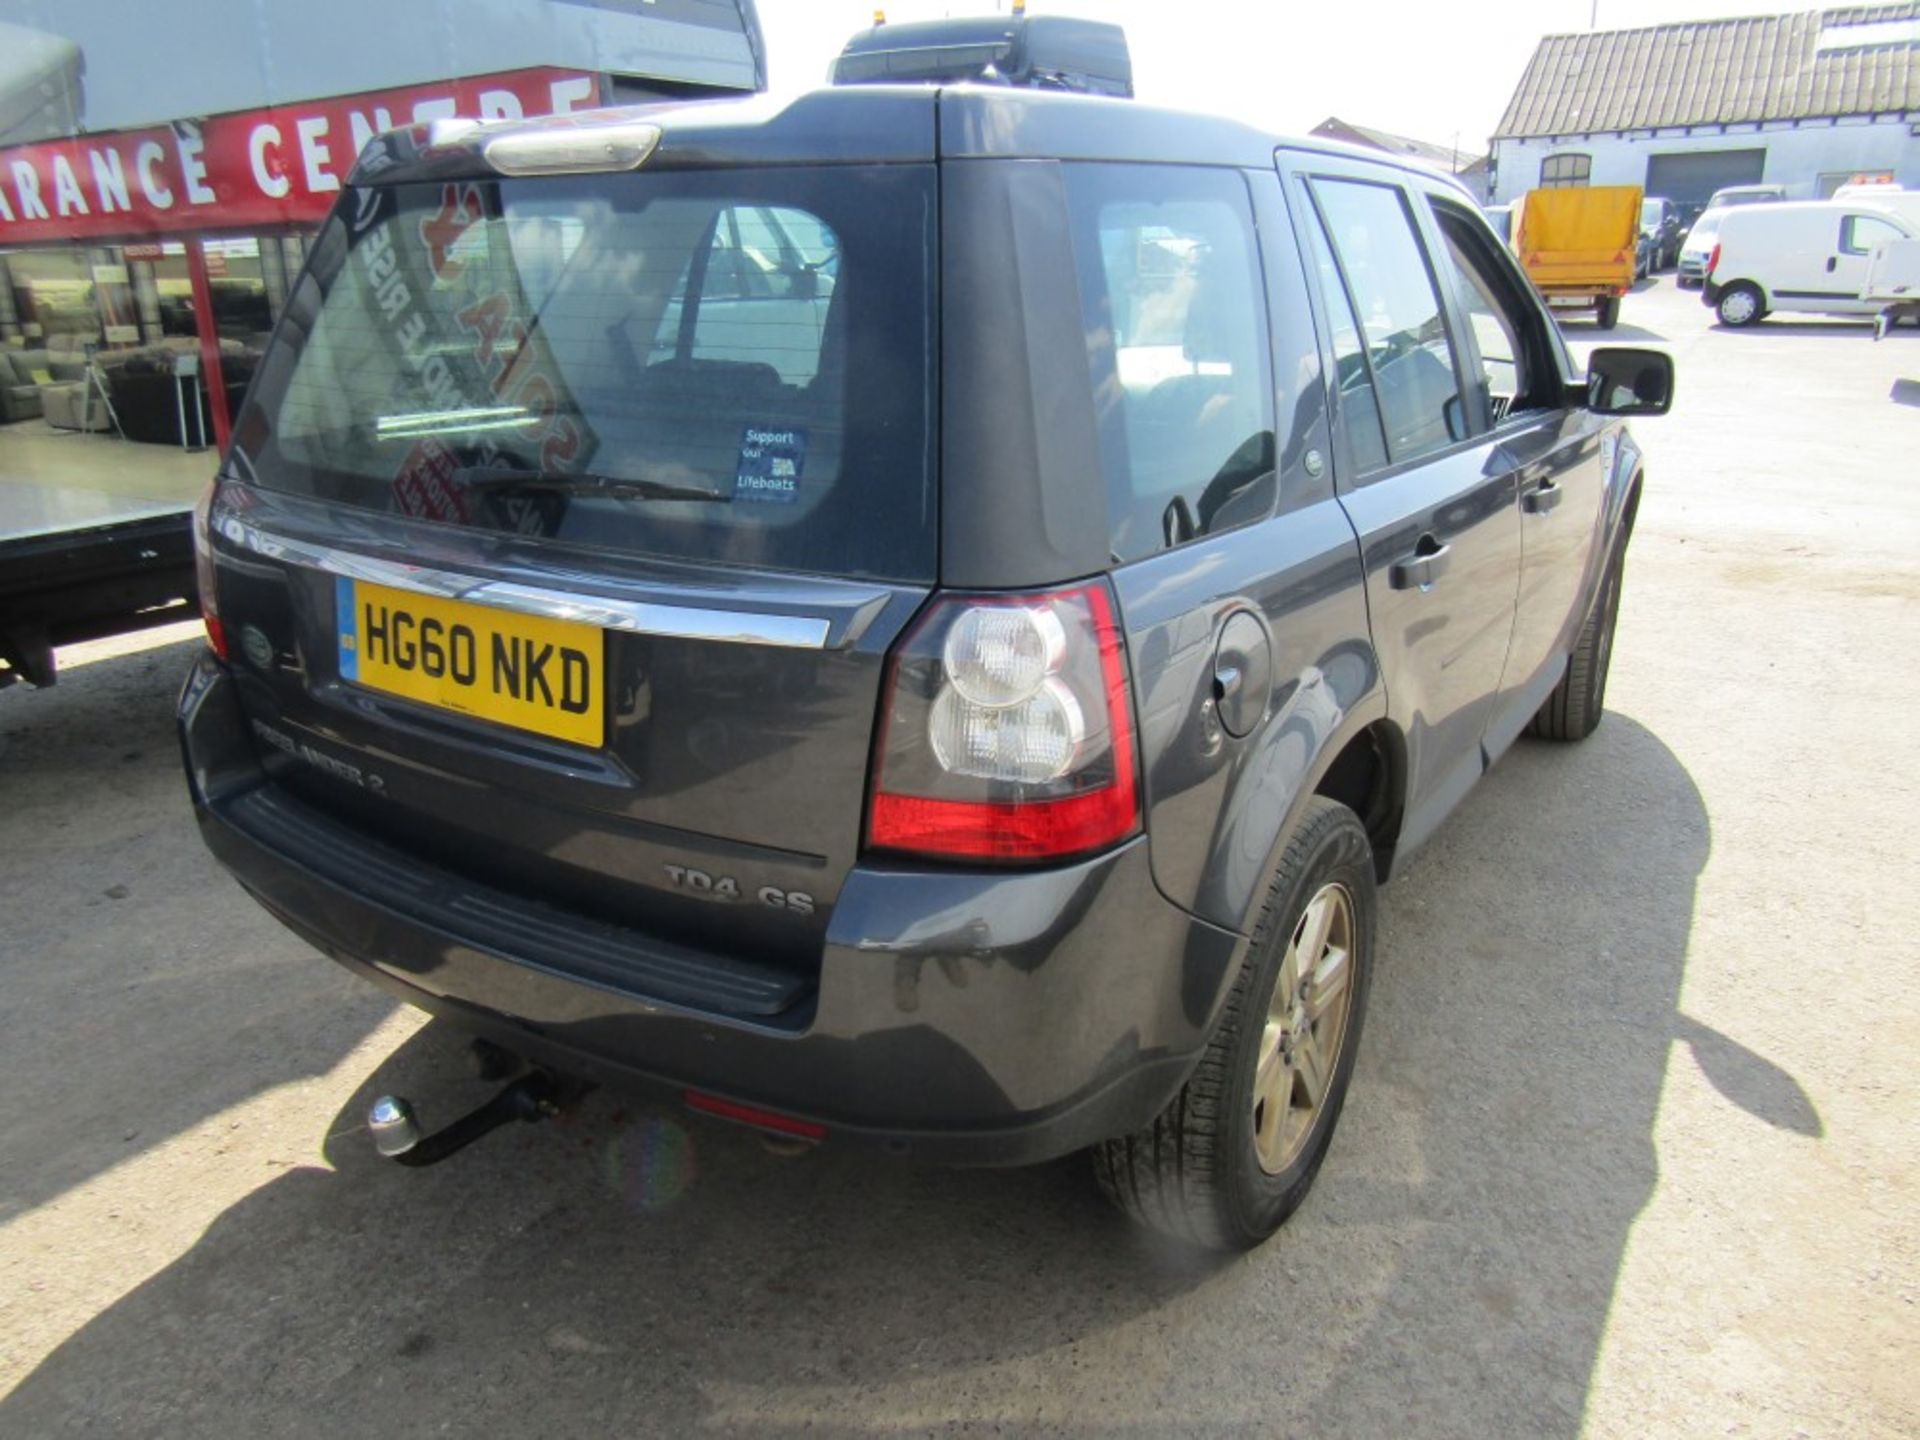 60 reg LAND ROVER FREELANDER 2 (JUMPS OUT OF 6TH GEAR) 1ST REG 10/10, TEST 12/22, 166149M NOT - Image 4 of 6